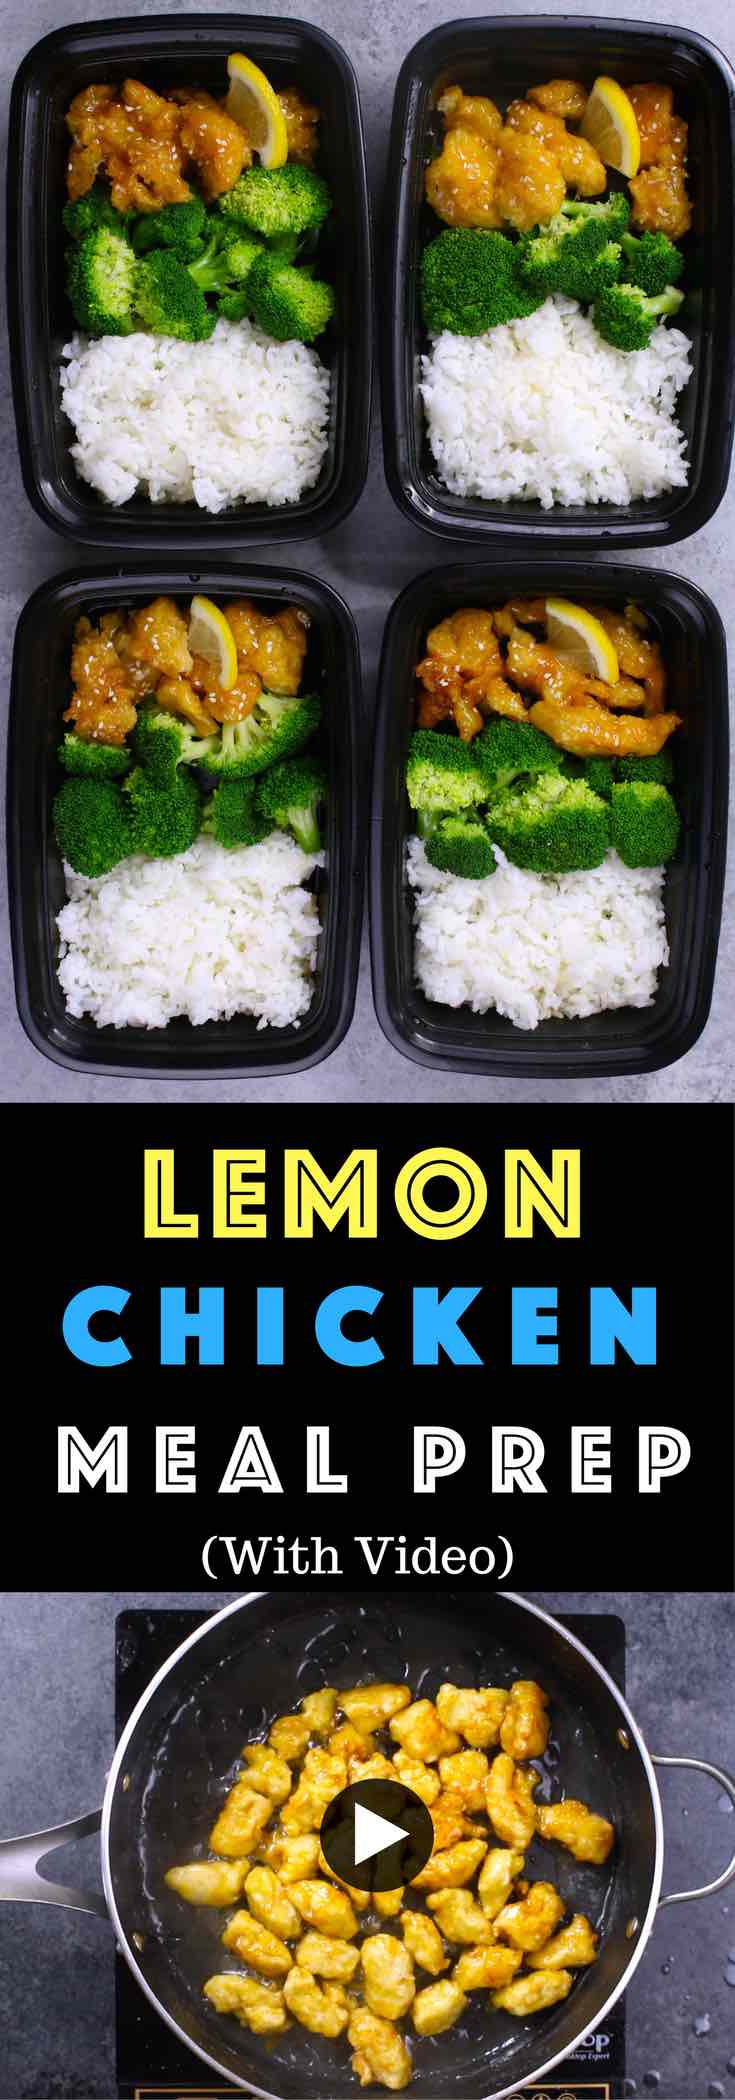 Save time and money when meal prep this authentic and delicious Chinese Lemon Chicken with rice and broccoli for the entire week! It’s so much better than take outs. Make ahead recipe. Video recipe. | Tipbuzz.com 